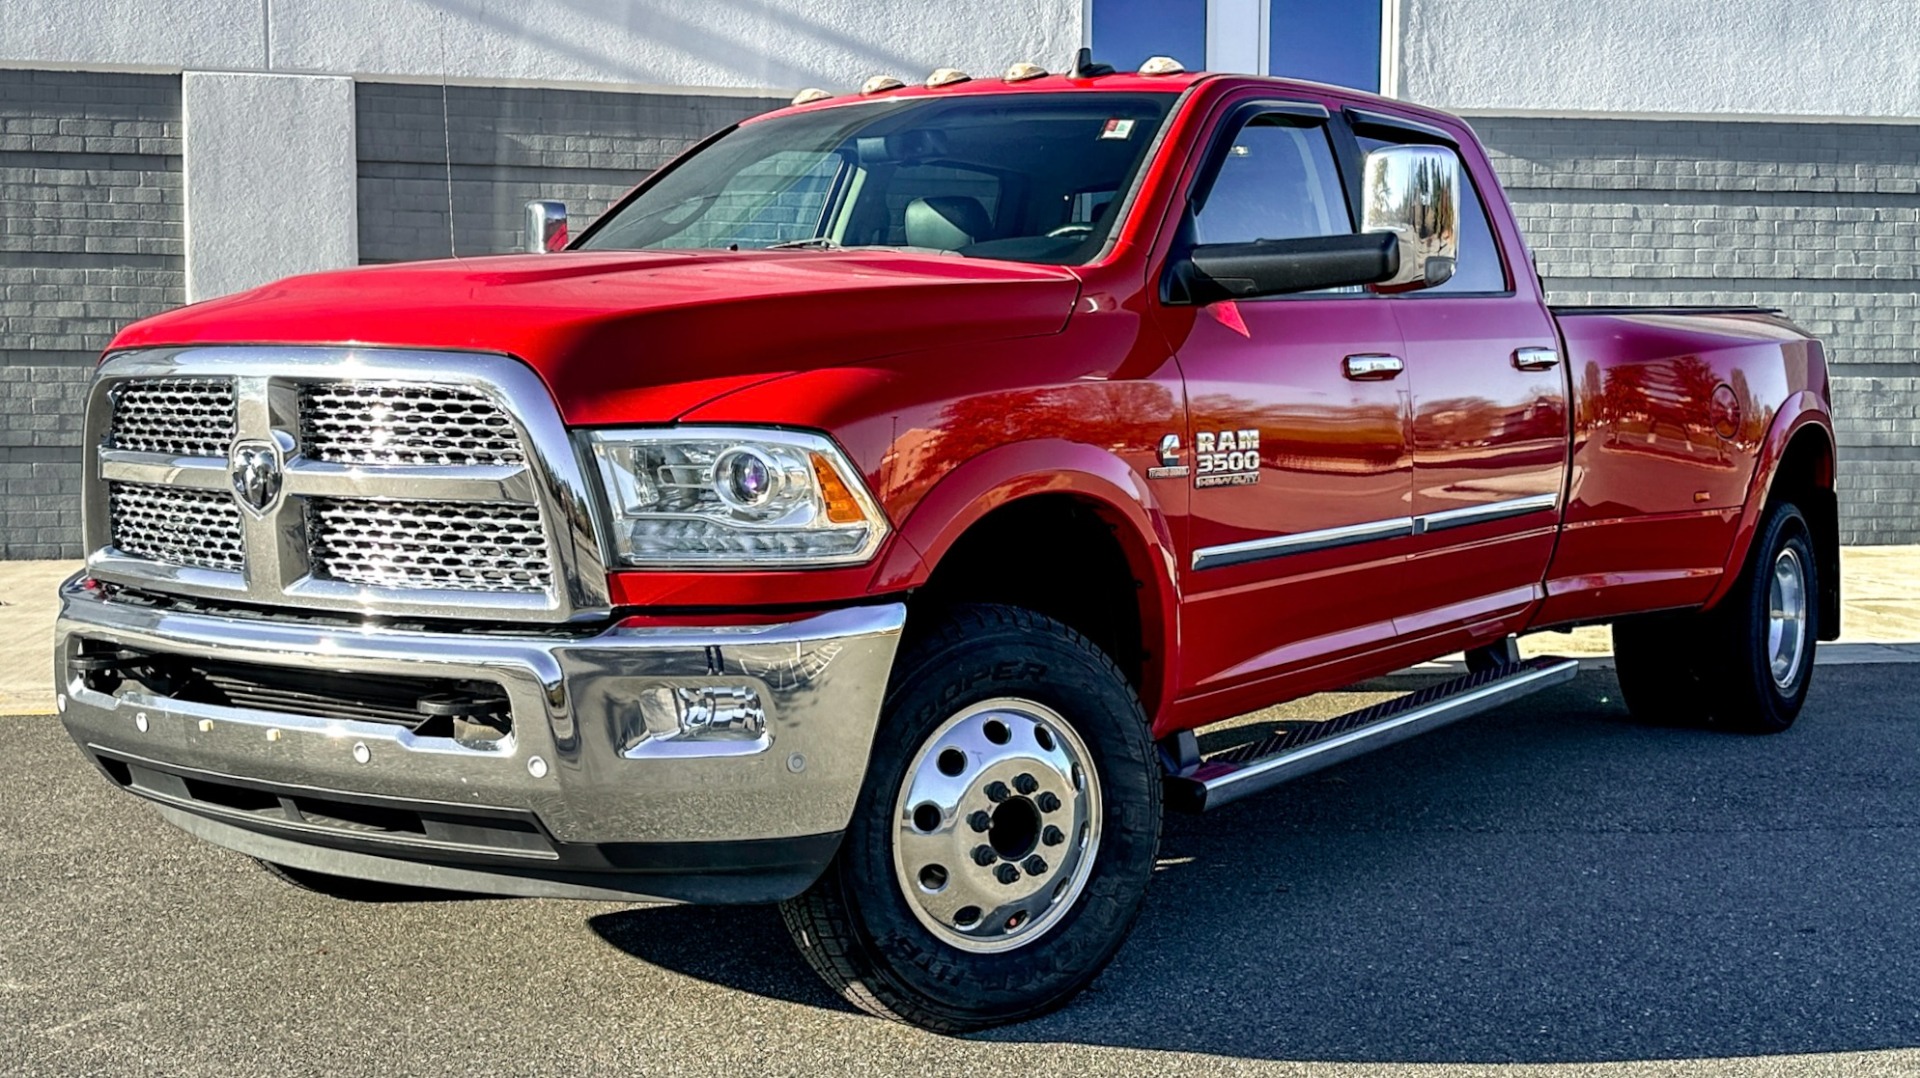 Used 2017 Ram 3500 LARAMIE / TURBO DIESEL / AISIN TRANSMISSION / DUAL REAR WHEELS / 4X4 / CREW for sale $45,995 at Formula Imports in Charlotte NC 28227 1